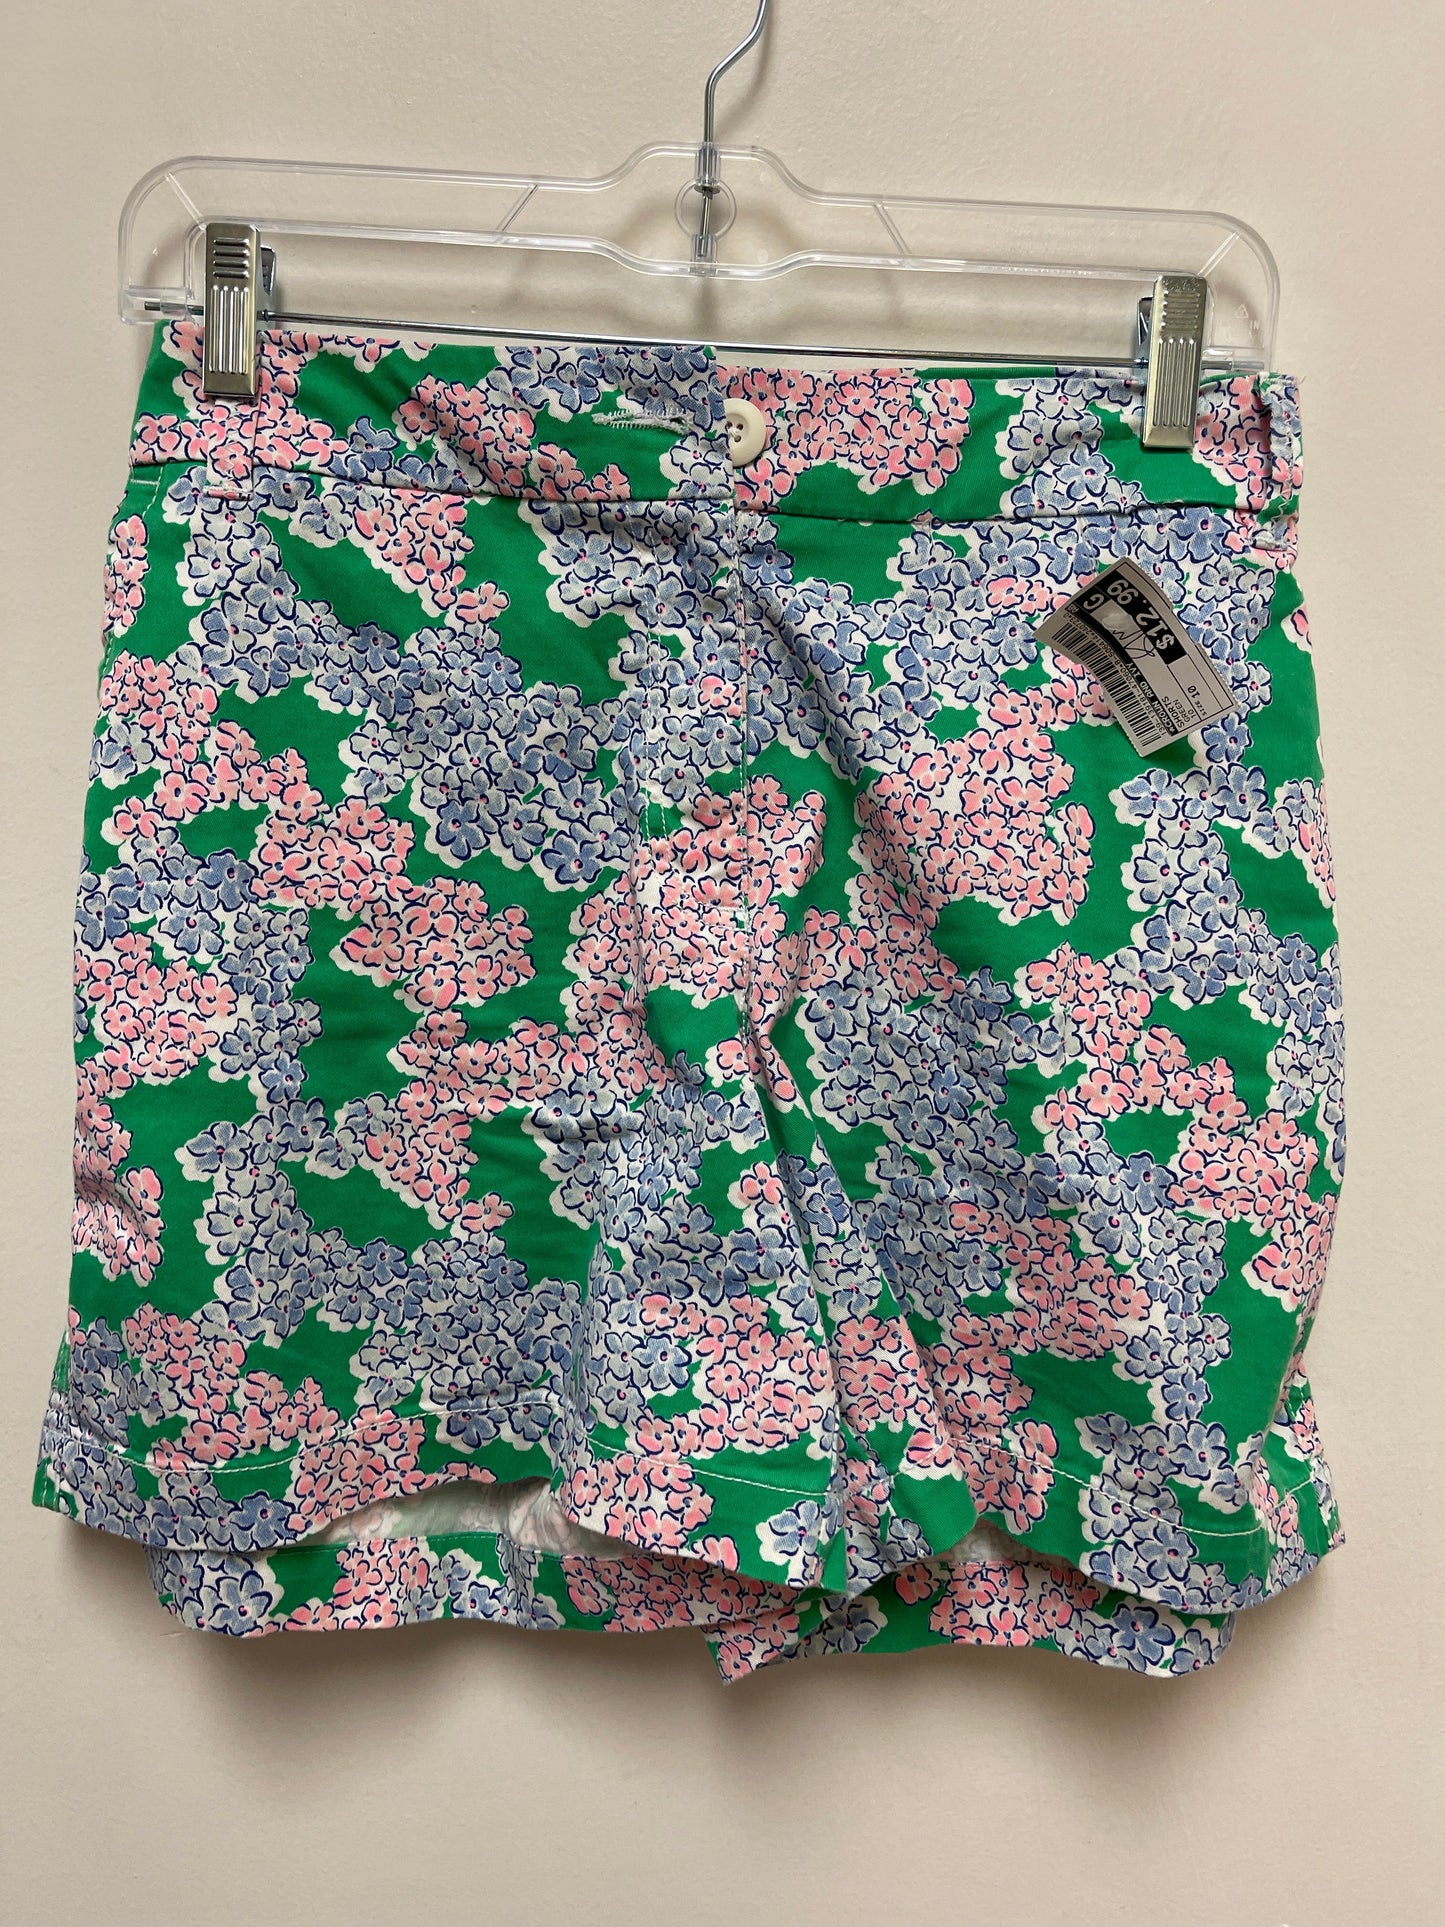 Green Shorts Crown And Ivy, Size 10